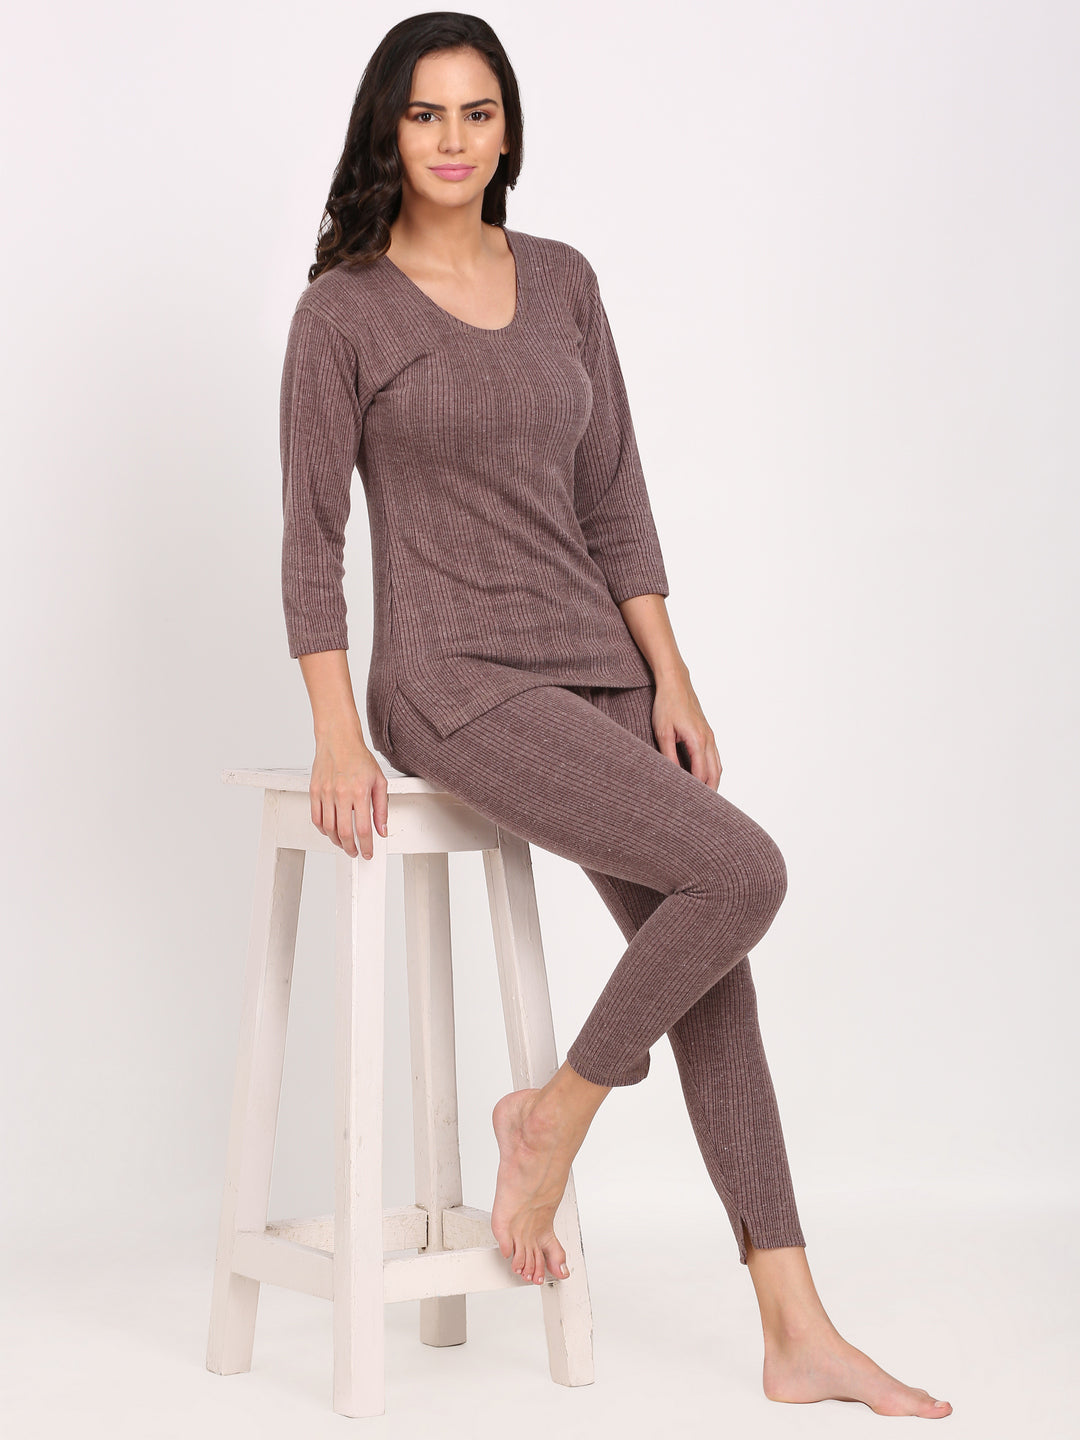 Touchwool Thermocot Women Thermal Wear Halfsleeve Manufacturer